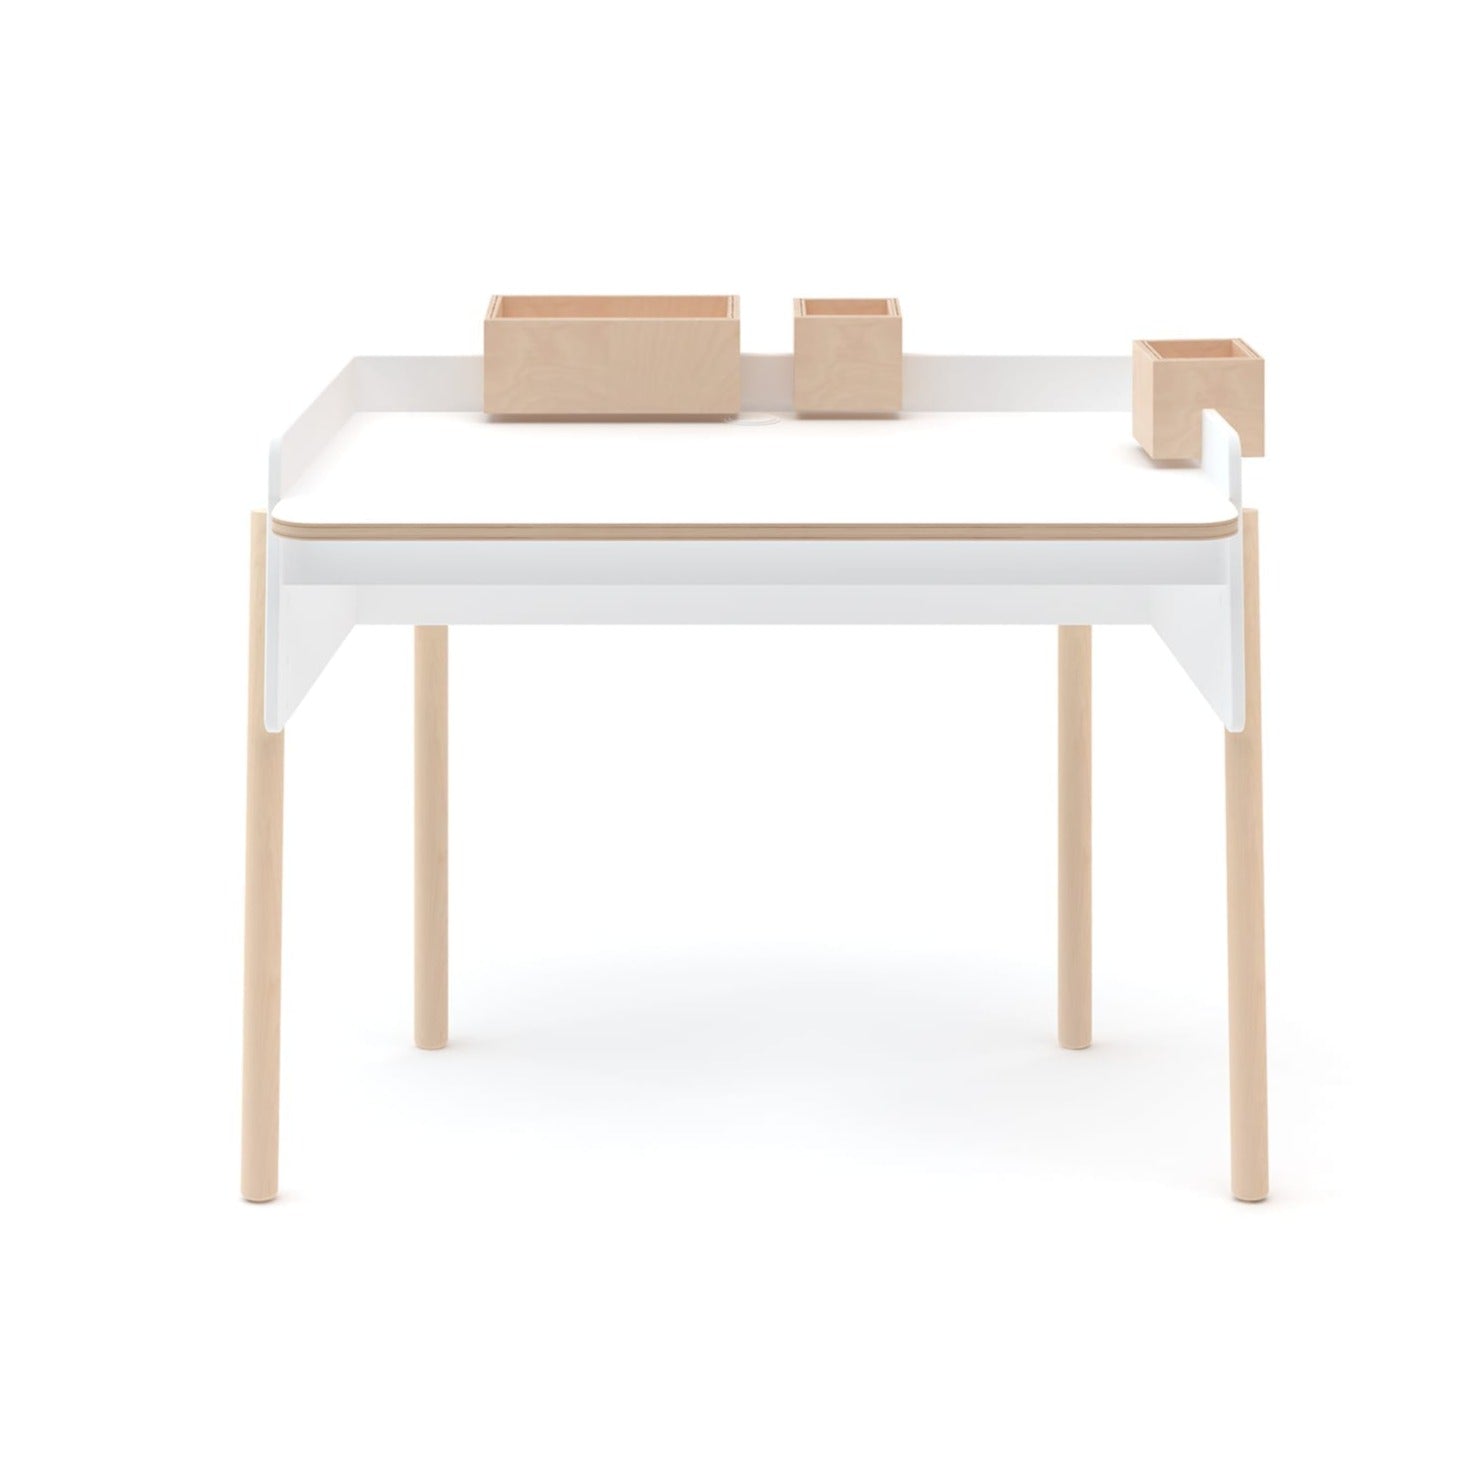 Brooklyn Child to Teen Desk by Oeuf NYC